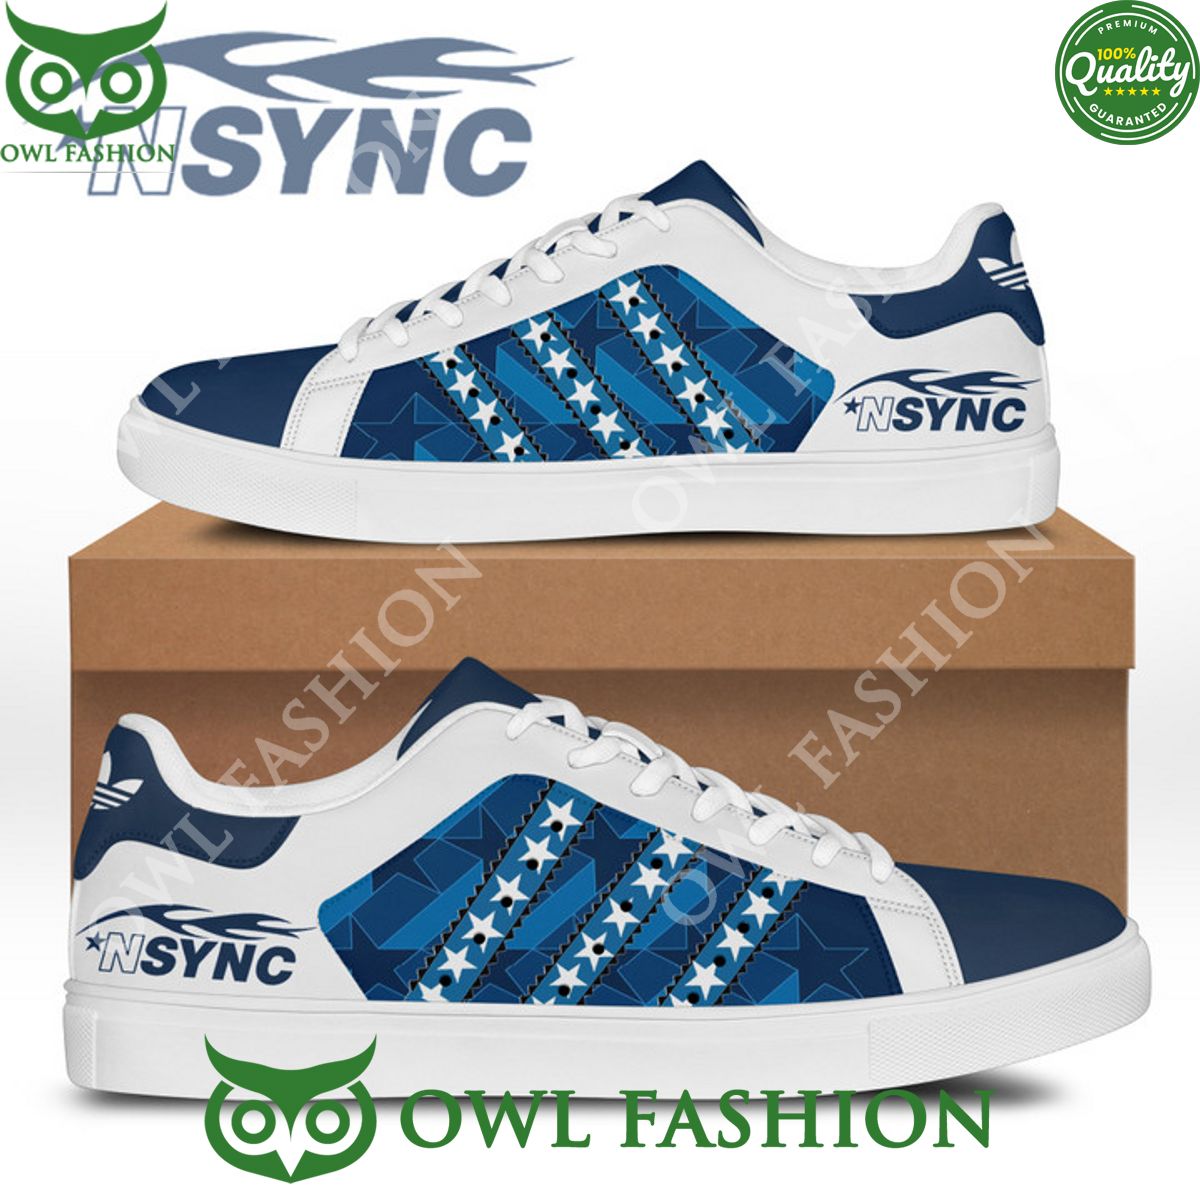 Nysnc American vocal group stan smith shoes Ah! It is marvellous